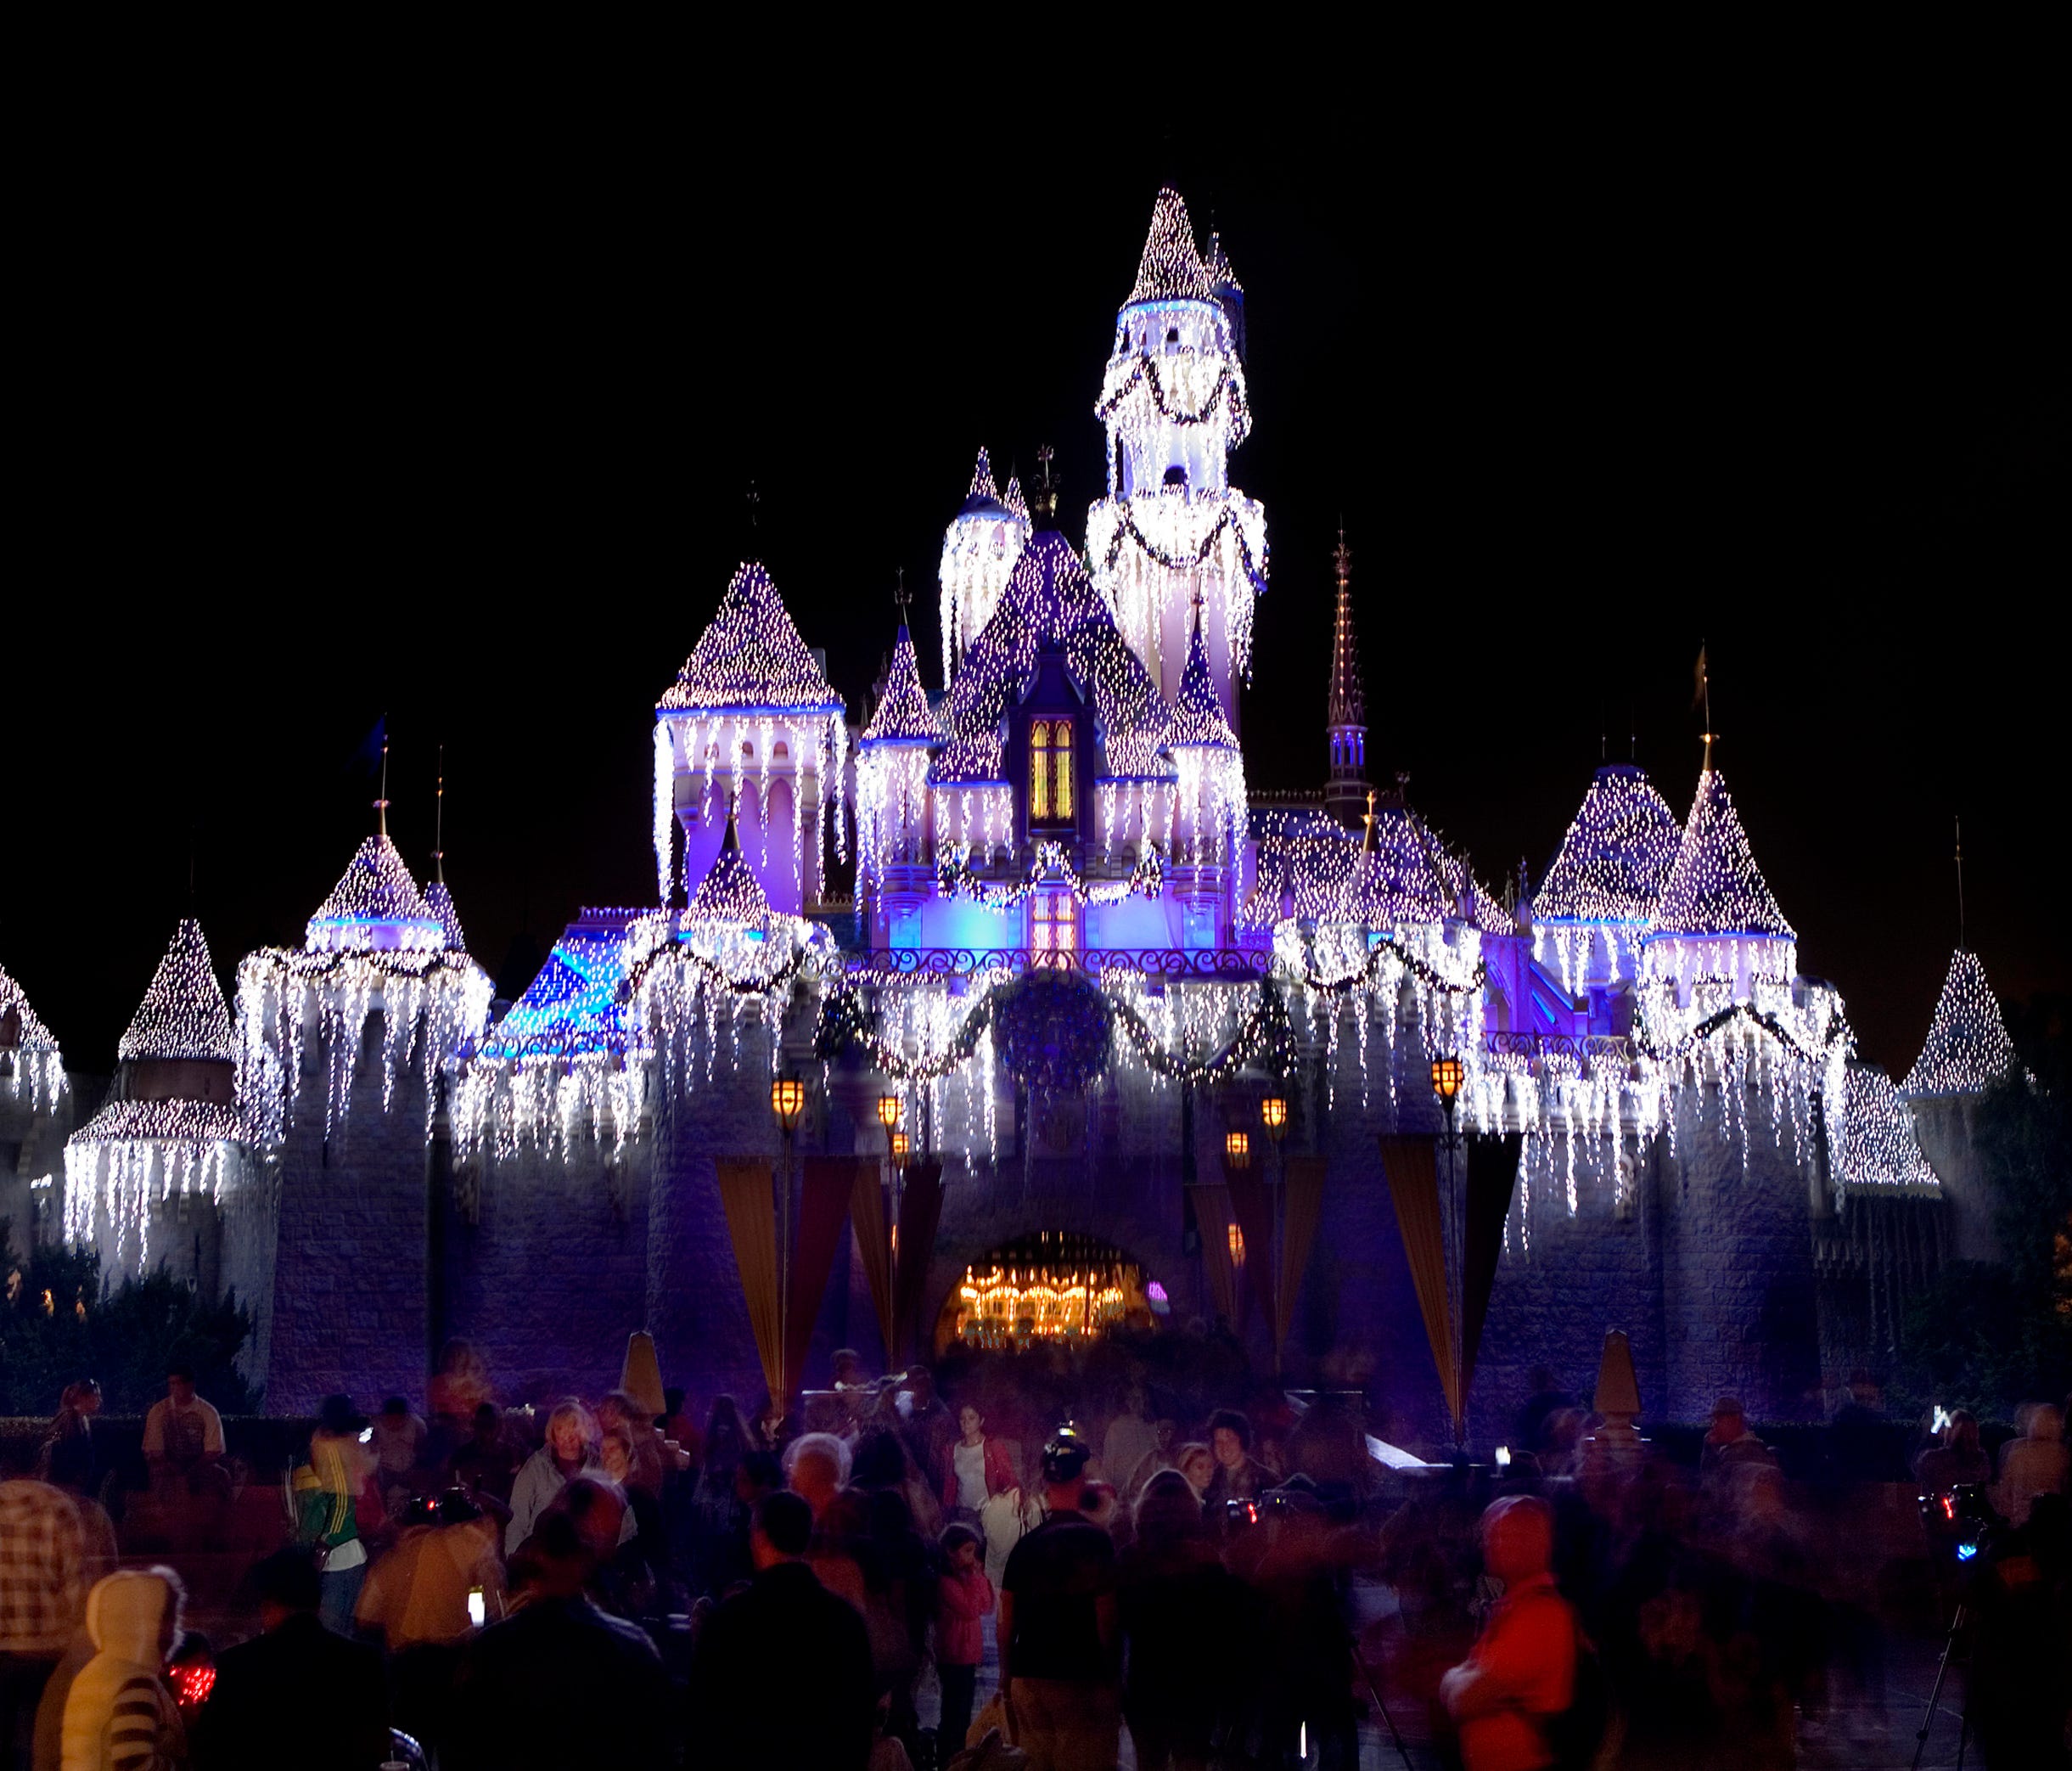 HOLIDAYS AT THE DISNEYLAND RESORT (ANAHEIM, Calif.) – The Disneyland Resort is a magical place for creating holiday memories with family and friends. Holidays at the Disneyland Resort will run from Nov. 10, 2016, through Jan 8, 2017, with the new 